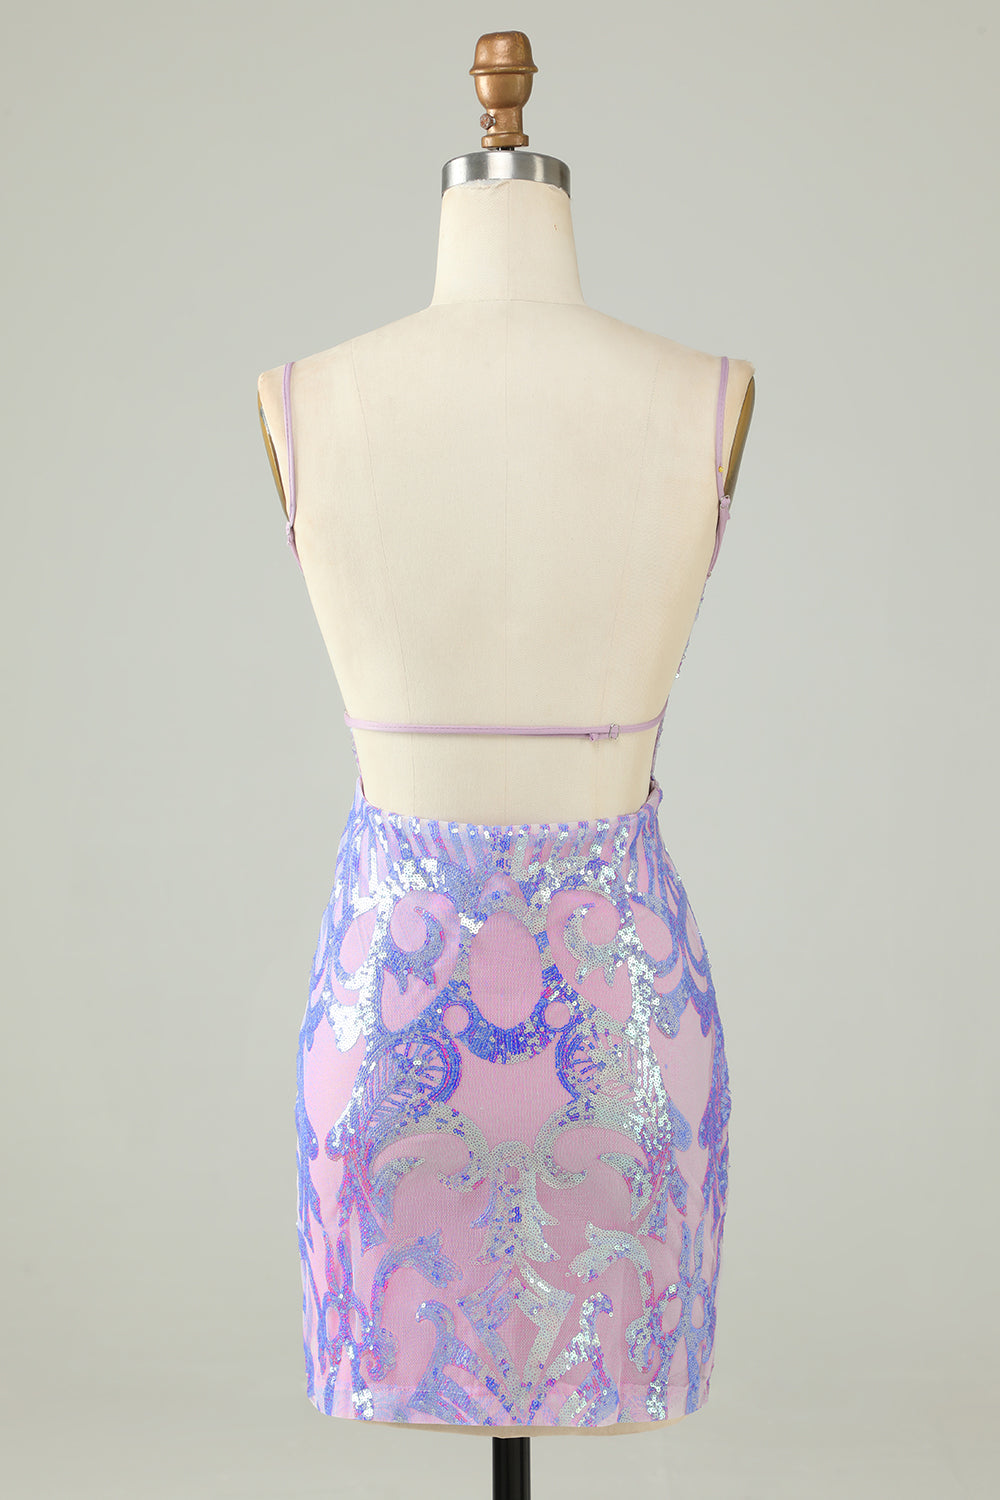 Sparkly Purple Sequins Backless Tight Short Homecoming Dress